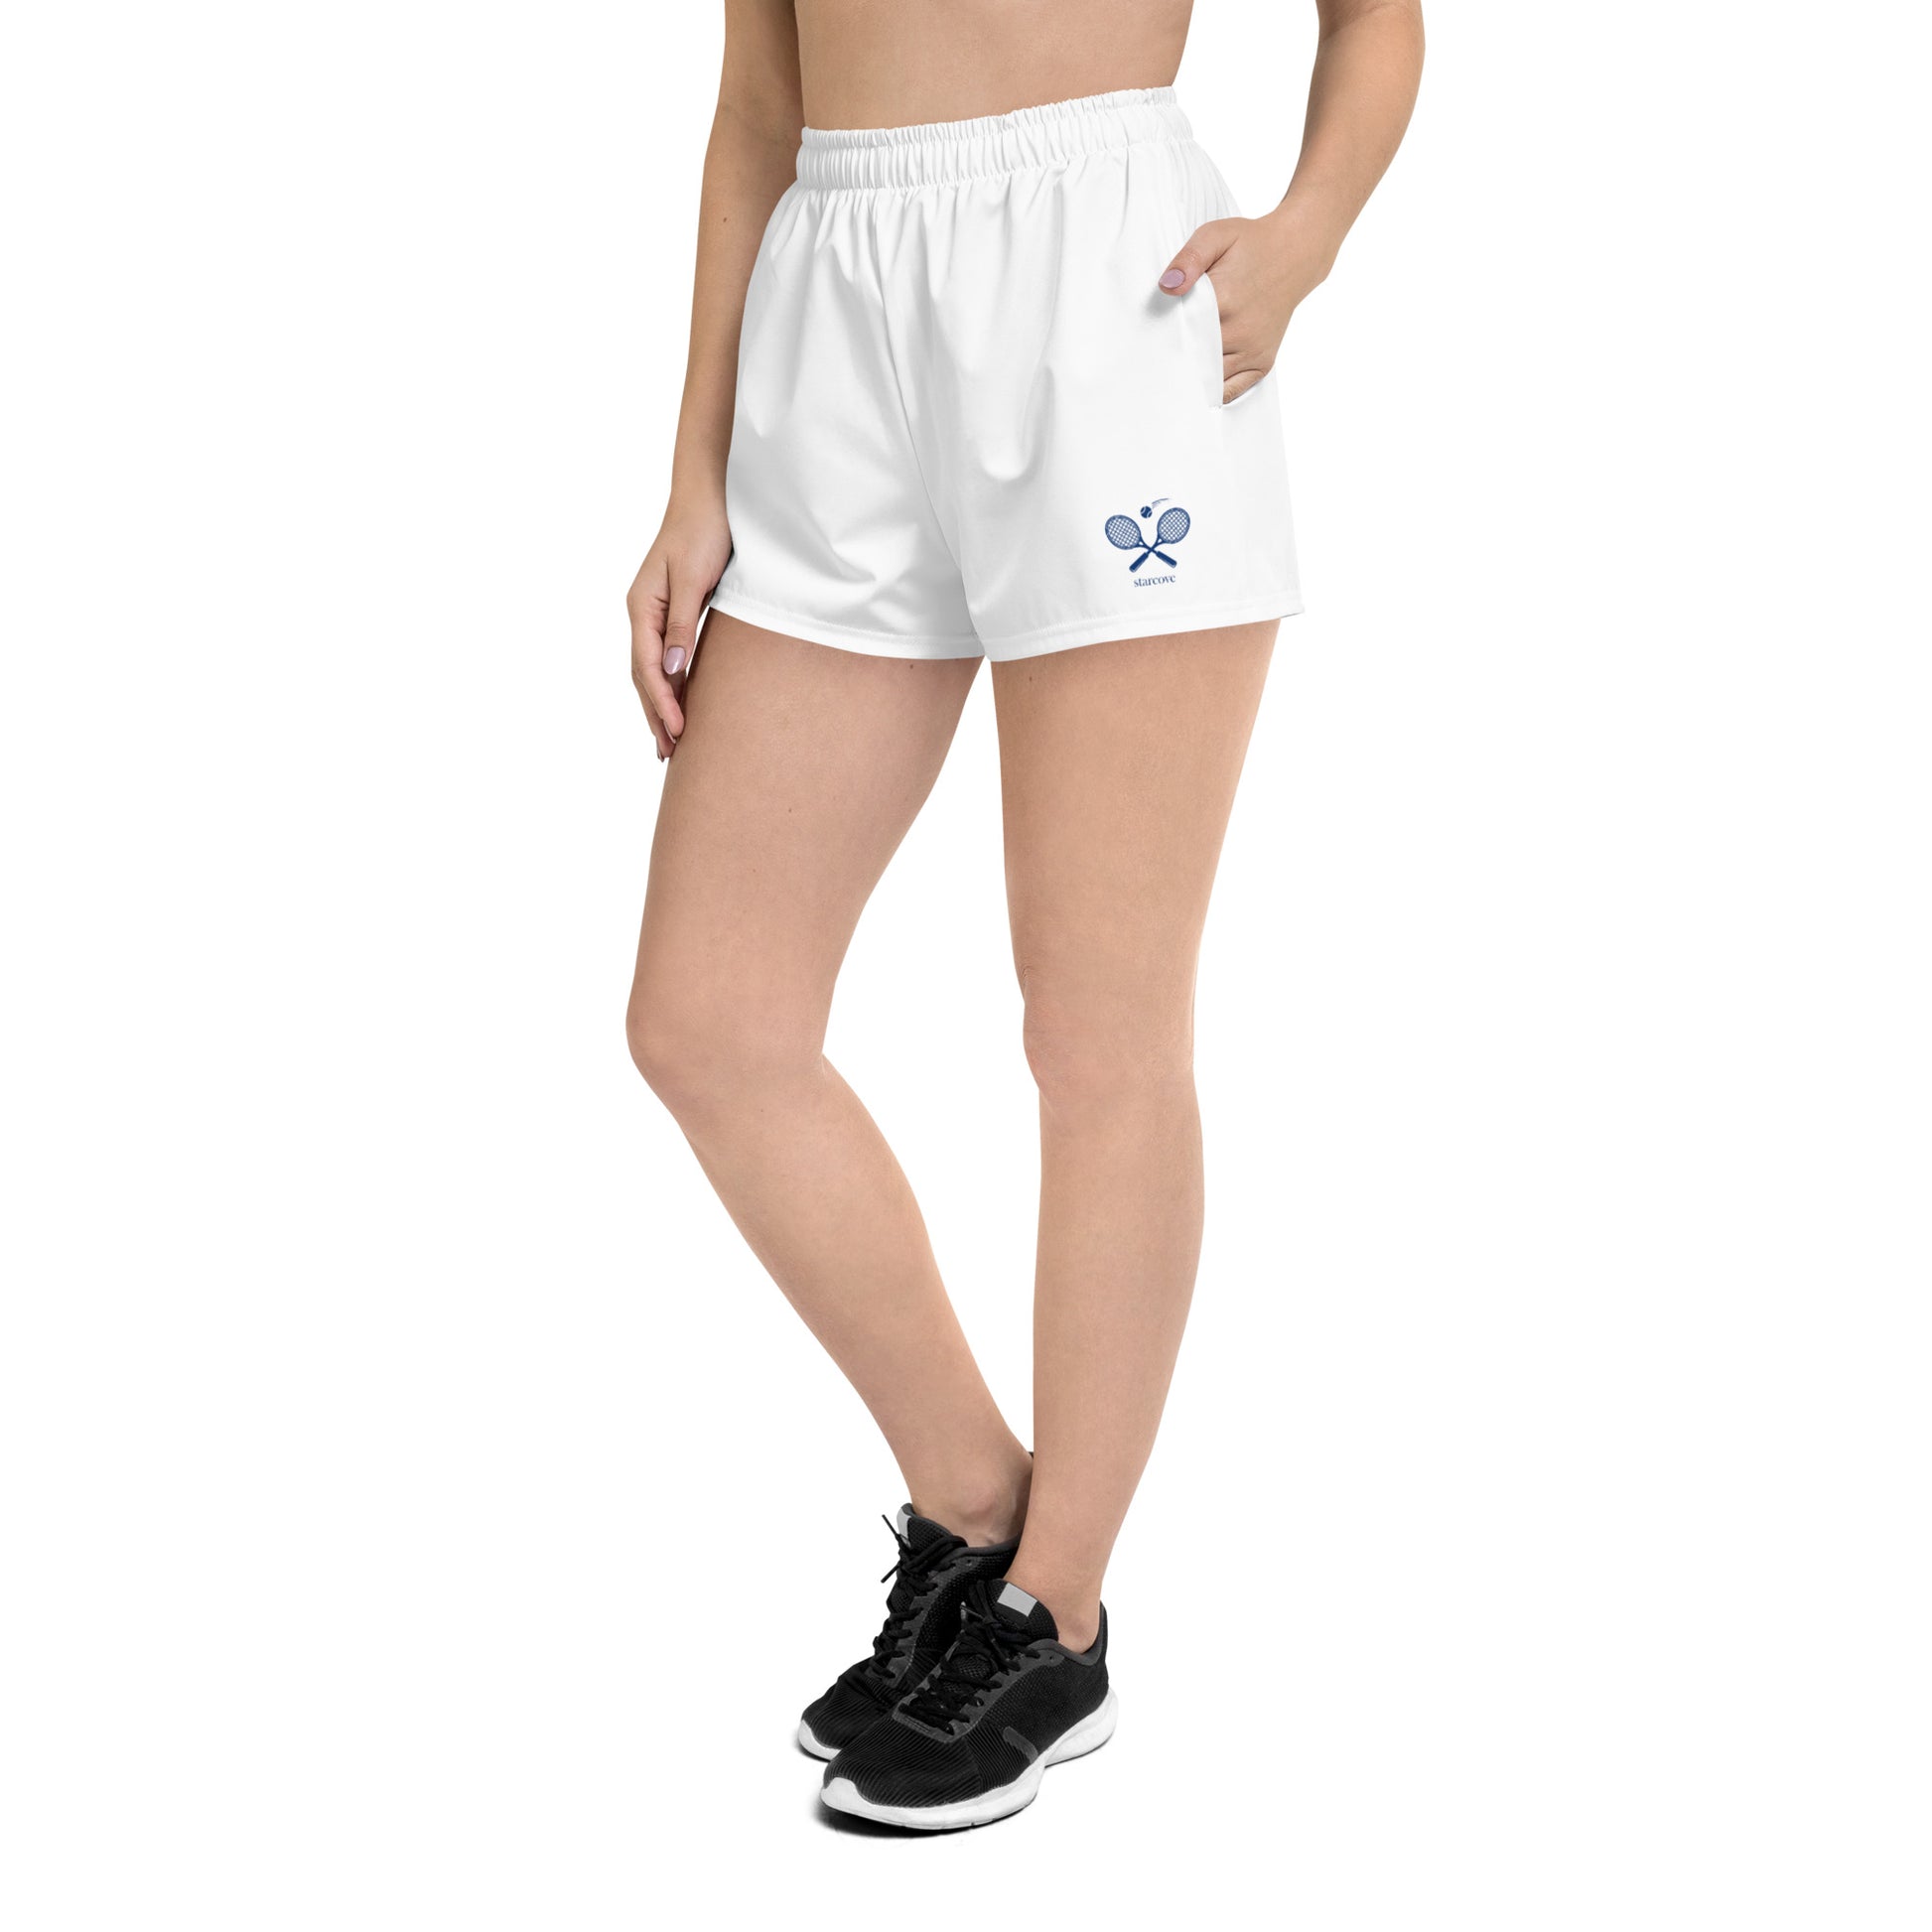 White Tennis Shorts Women with Ball Pockets, Athletic Vintage